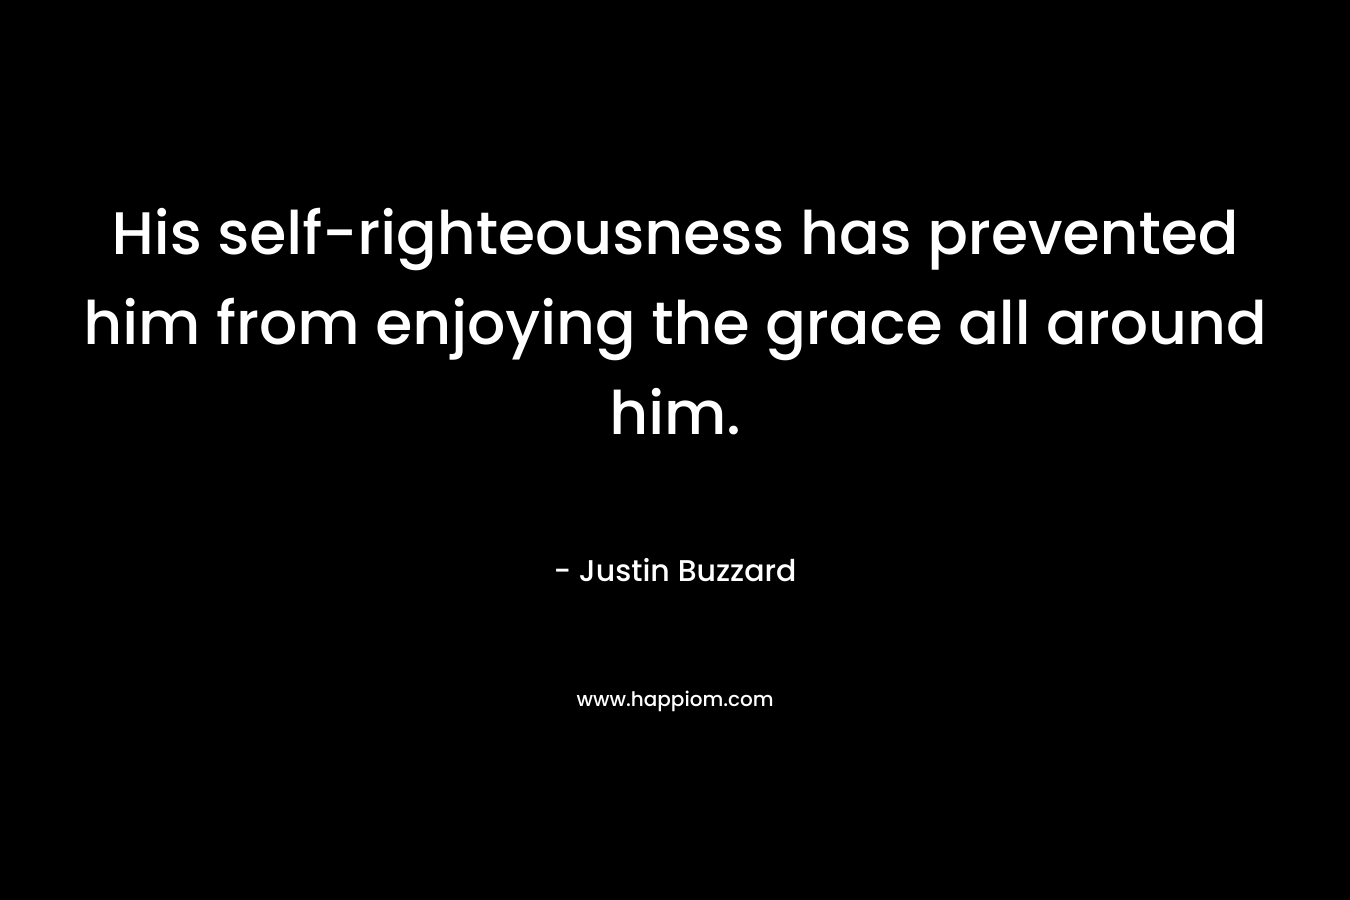 His self-righteousness has prevented him from enjoying the grace all around him. – Justin Buzzard